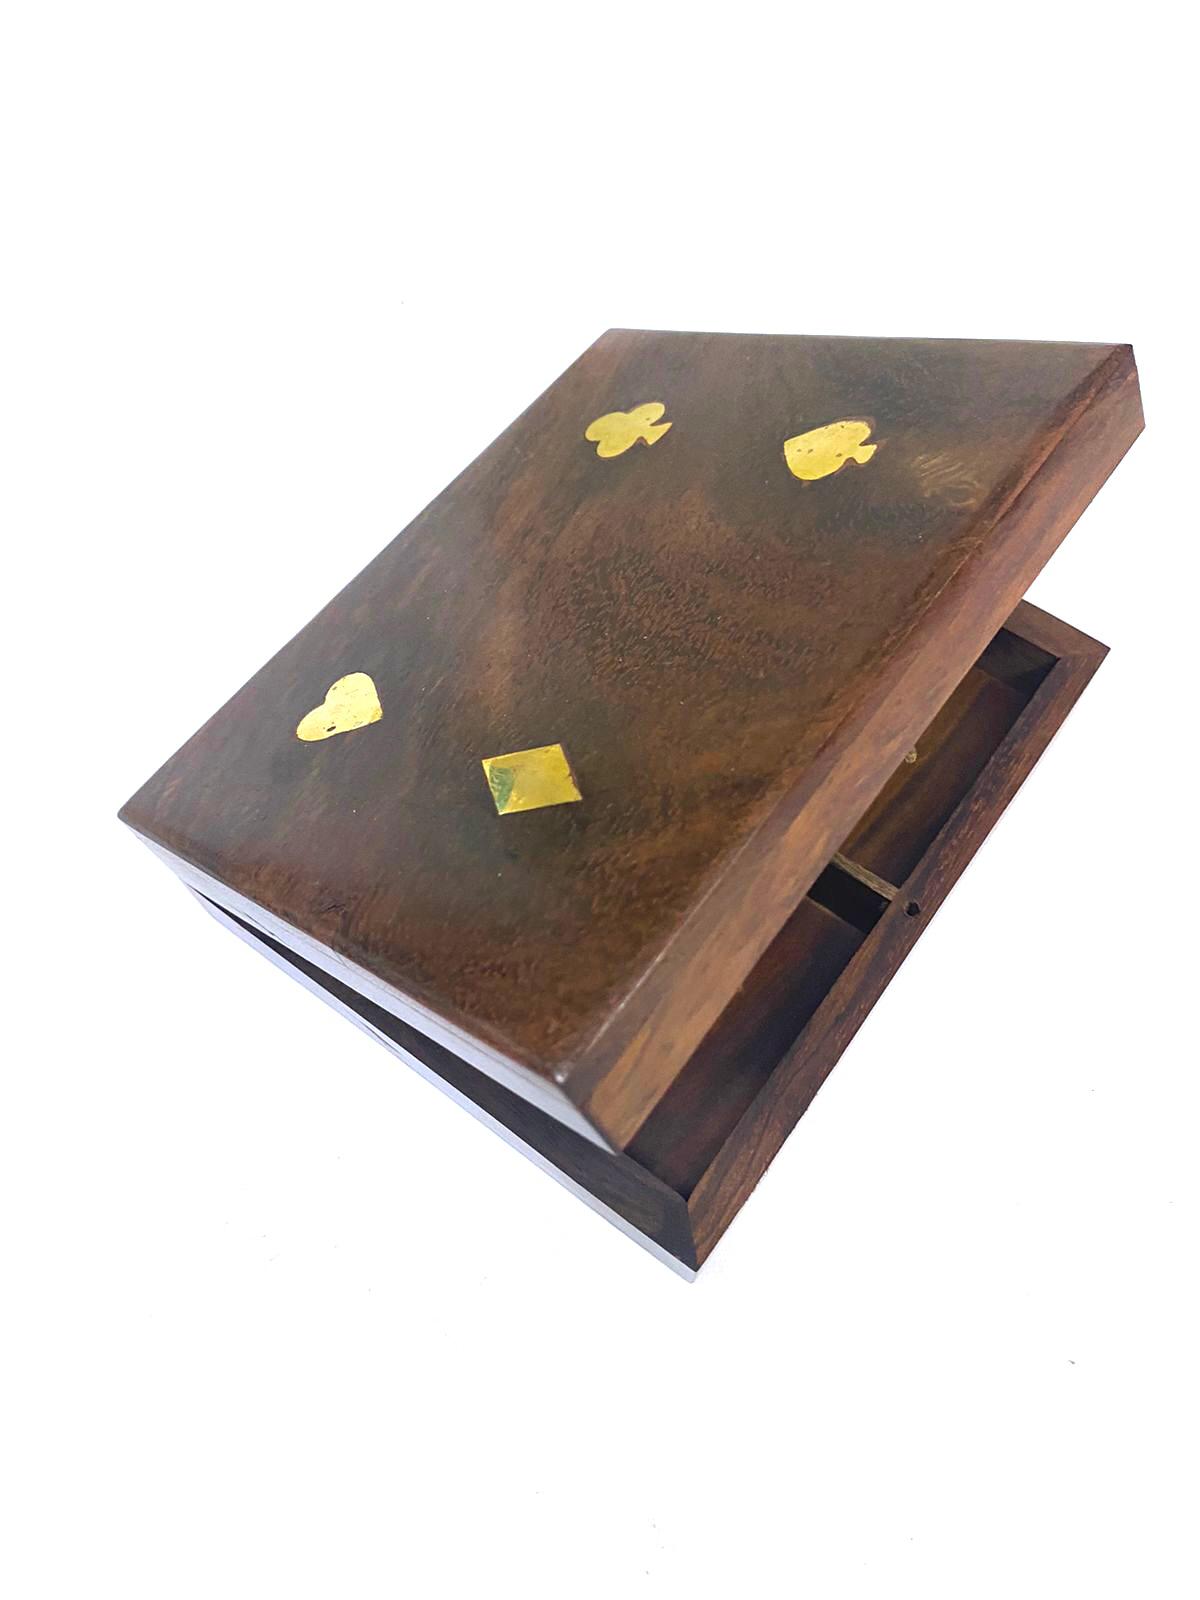 Playing Cards Wooden Storage Box Exciting Designs To Showcase By Tamrapatra